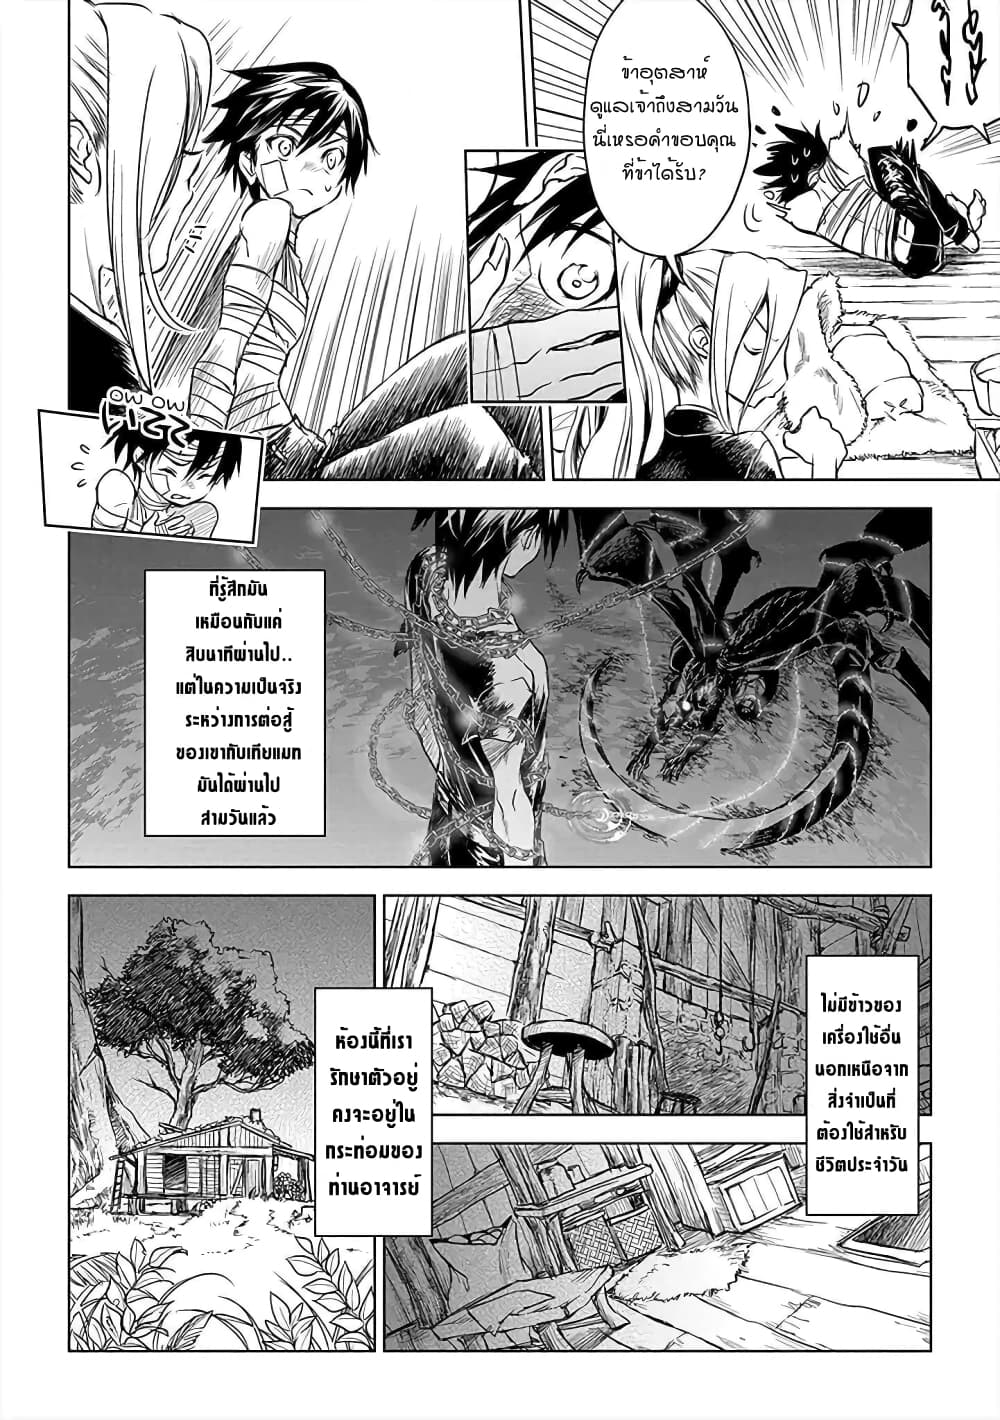 Ori of the Dragon Chain Heart in the Mind 9 (2)